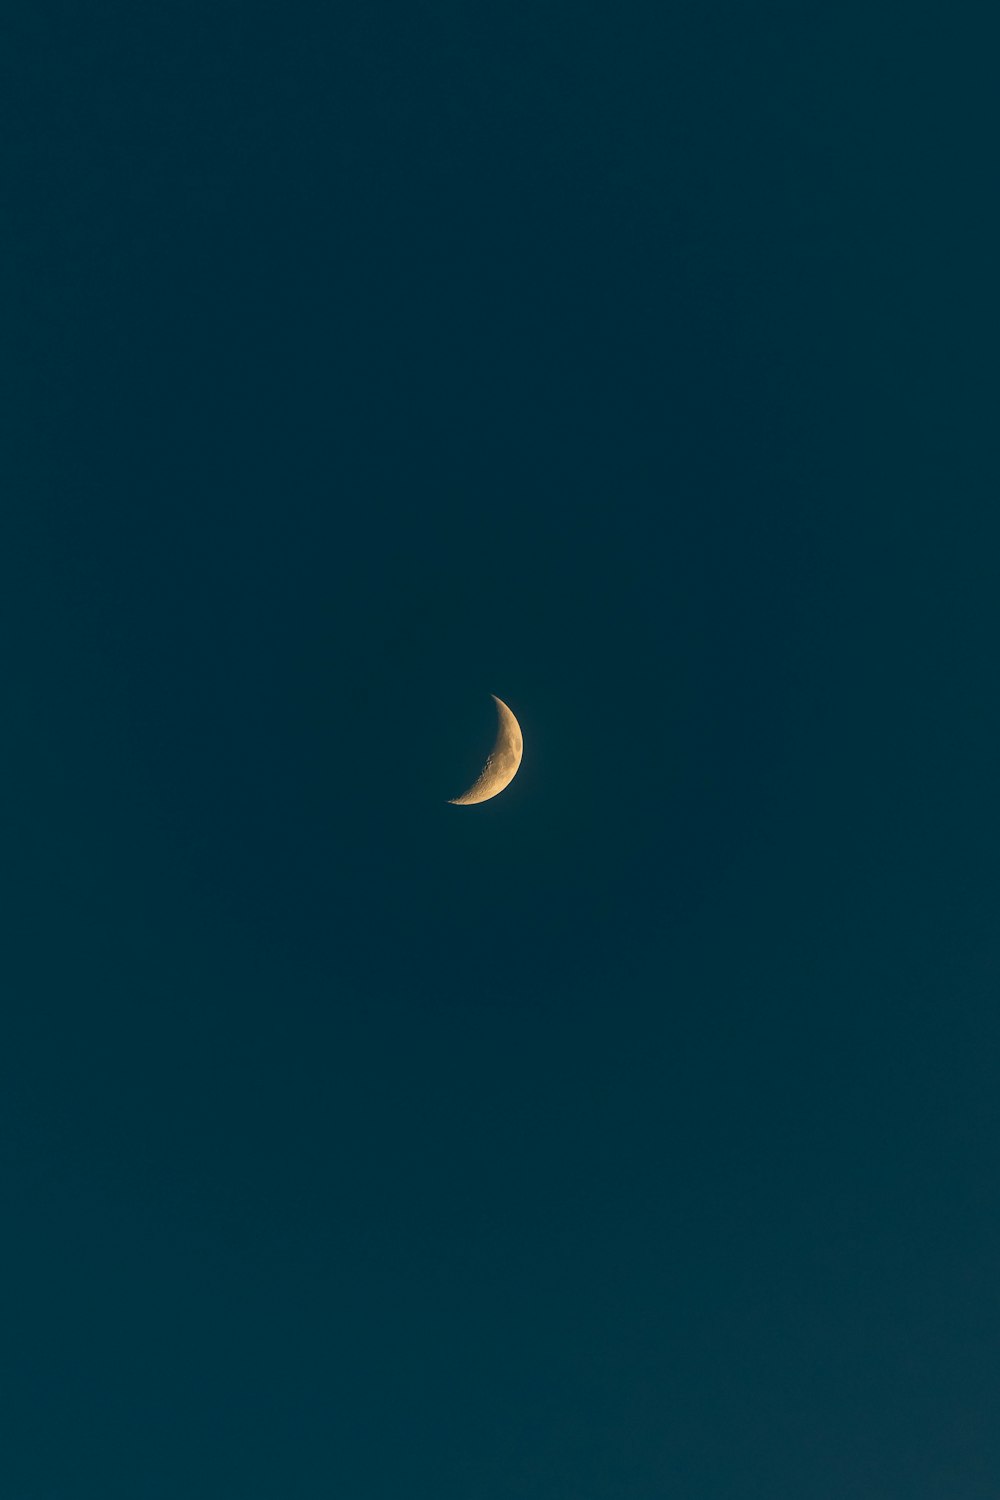 white crescent moon in blue sky